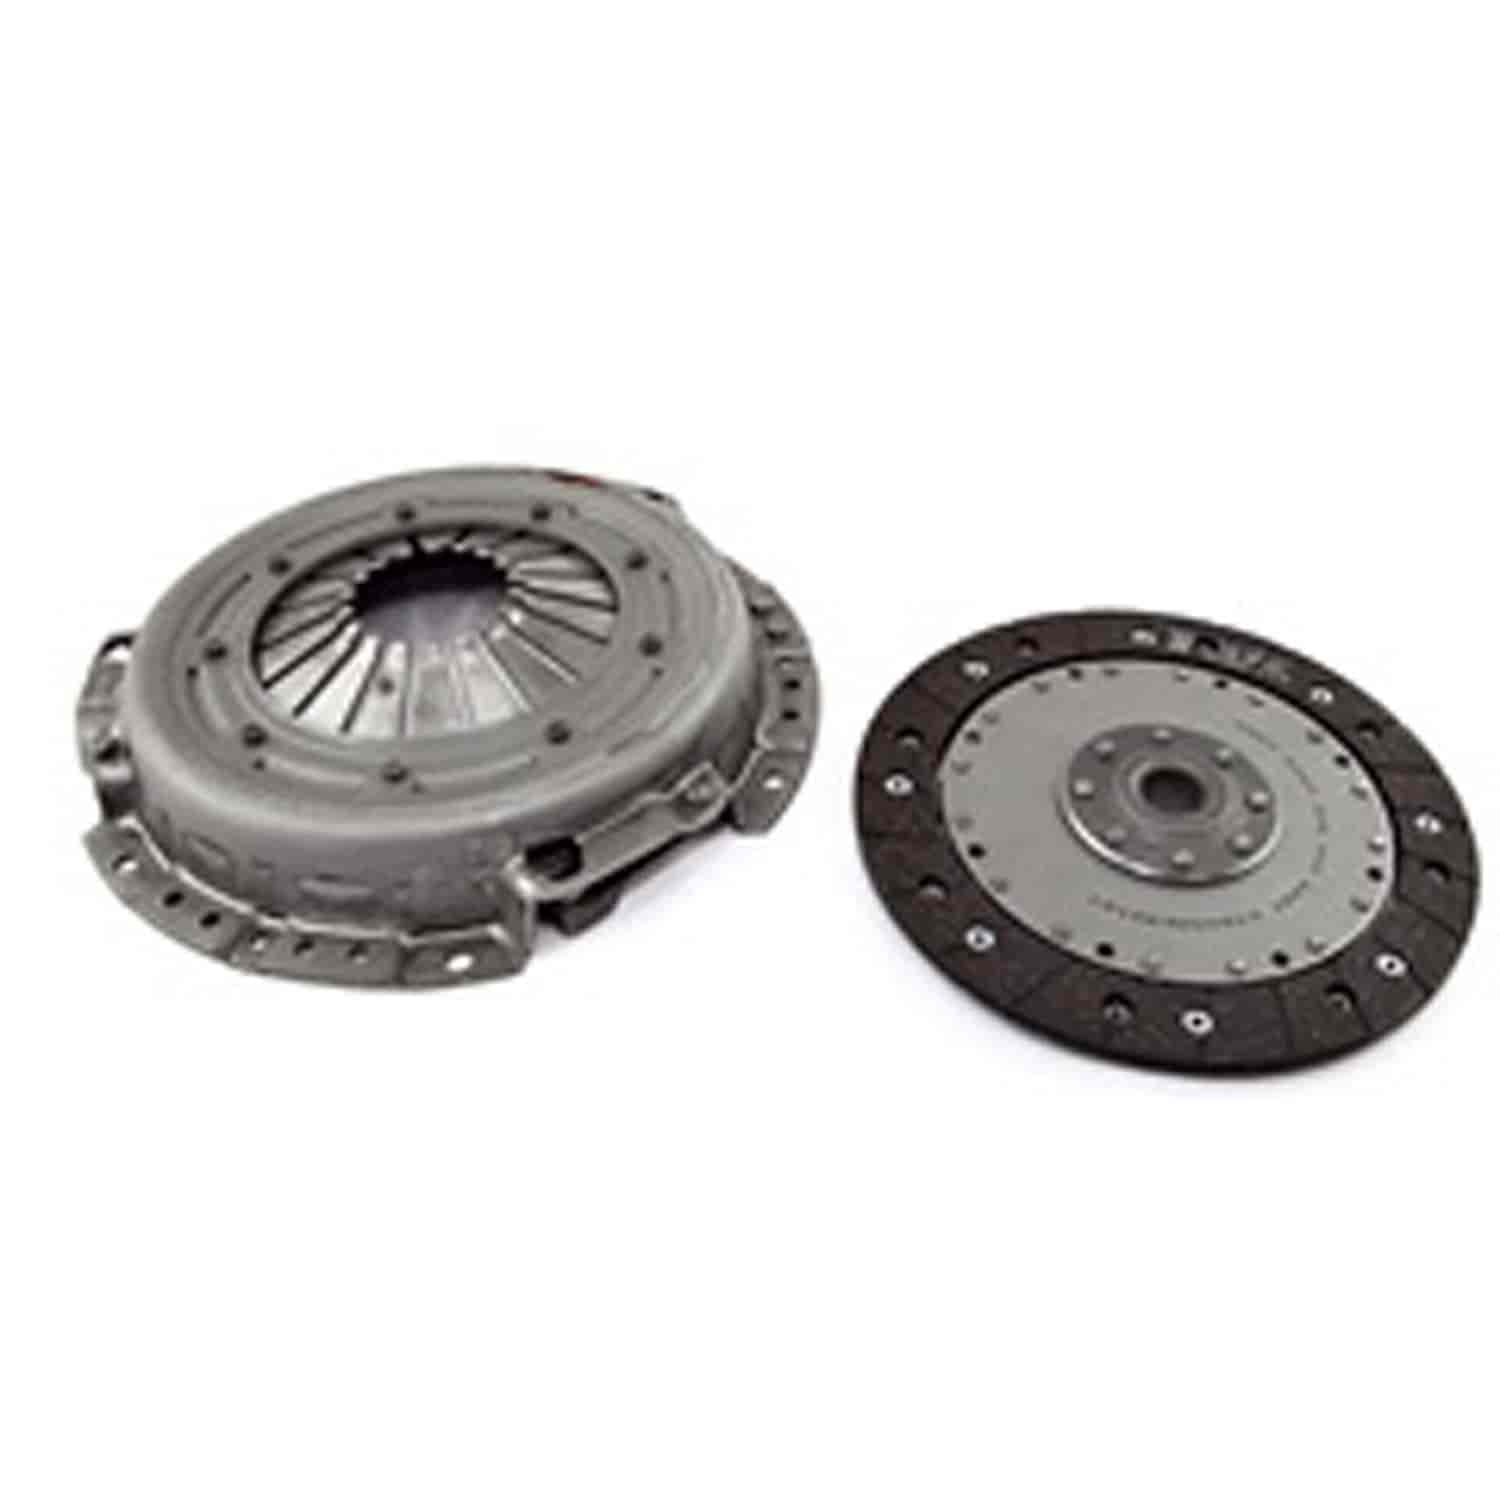 This Junior Clutch Kit from Omix-ADA fits 2005 Jeep Libertys and 05-06 Wranglers with a 2.4L engine.